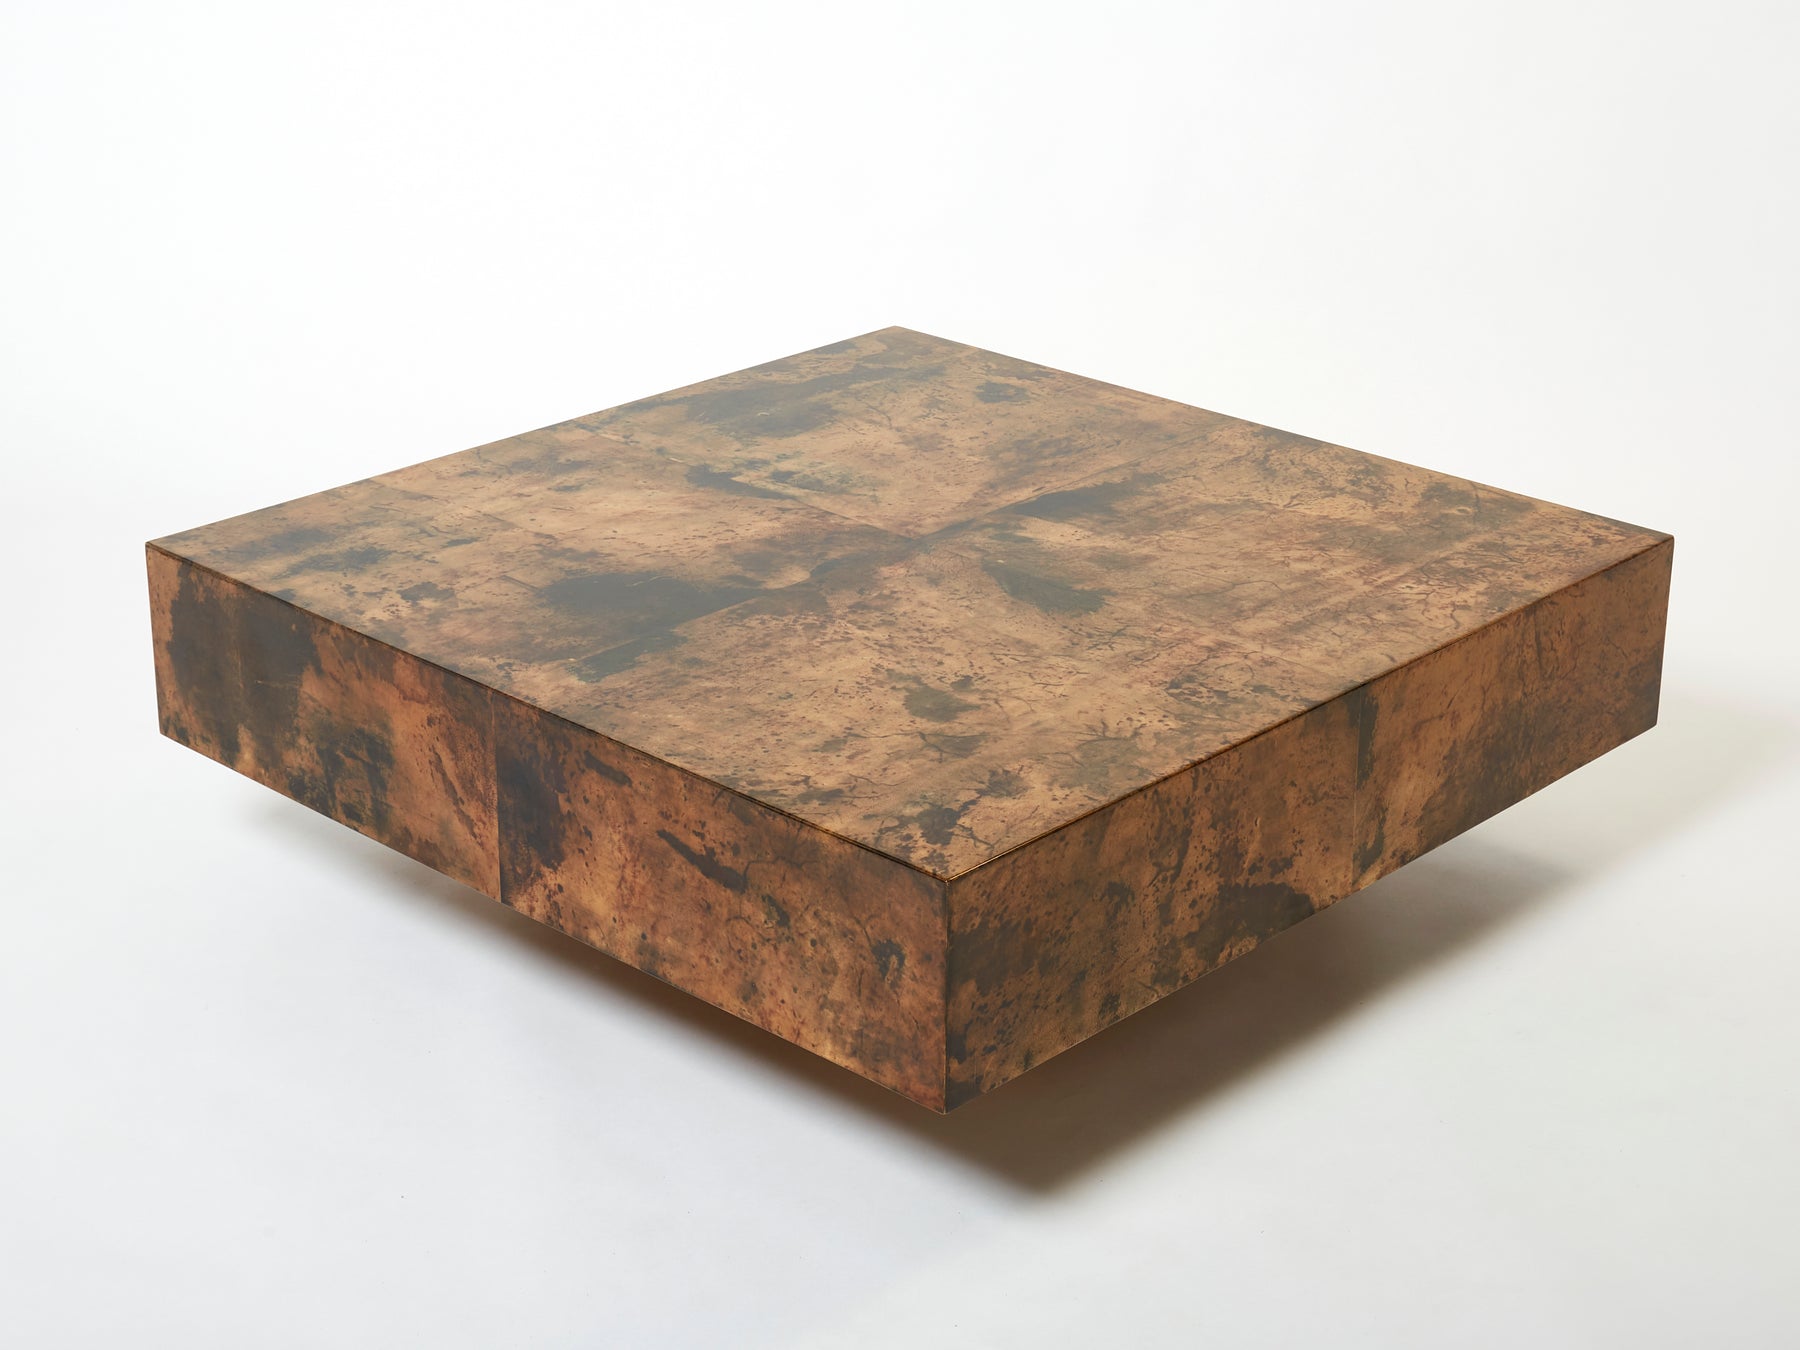 Large square goatskin parchment coffee table by Aldo Tura 1960s